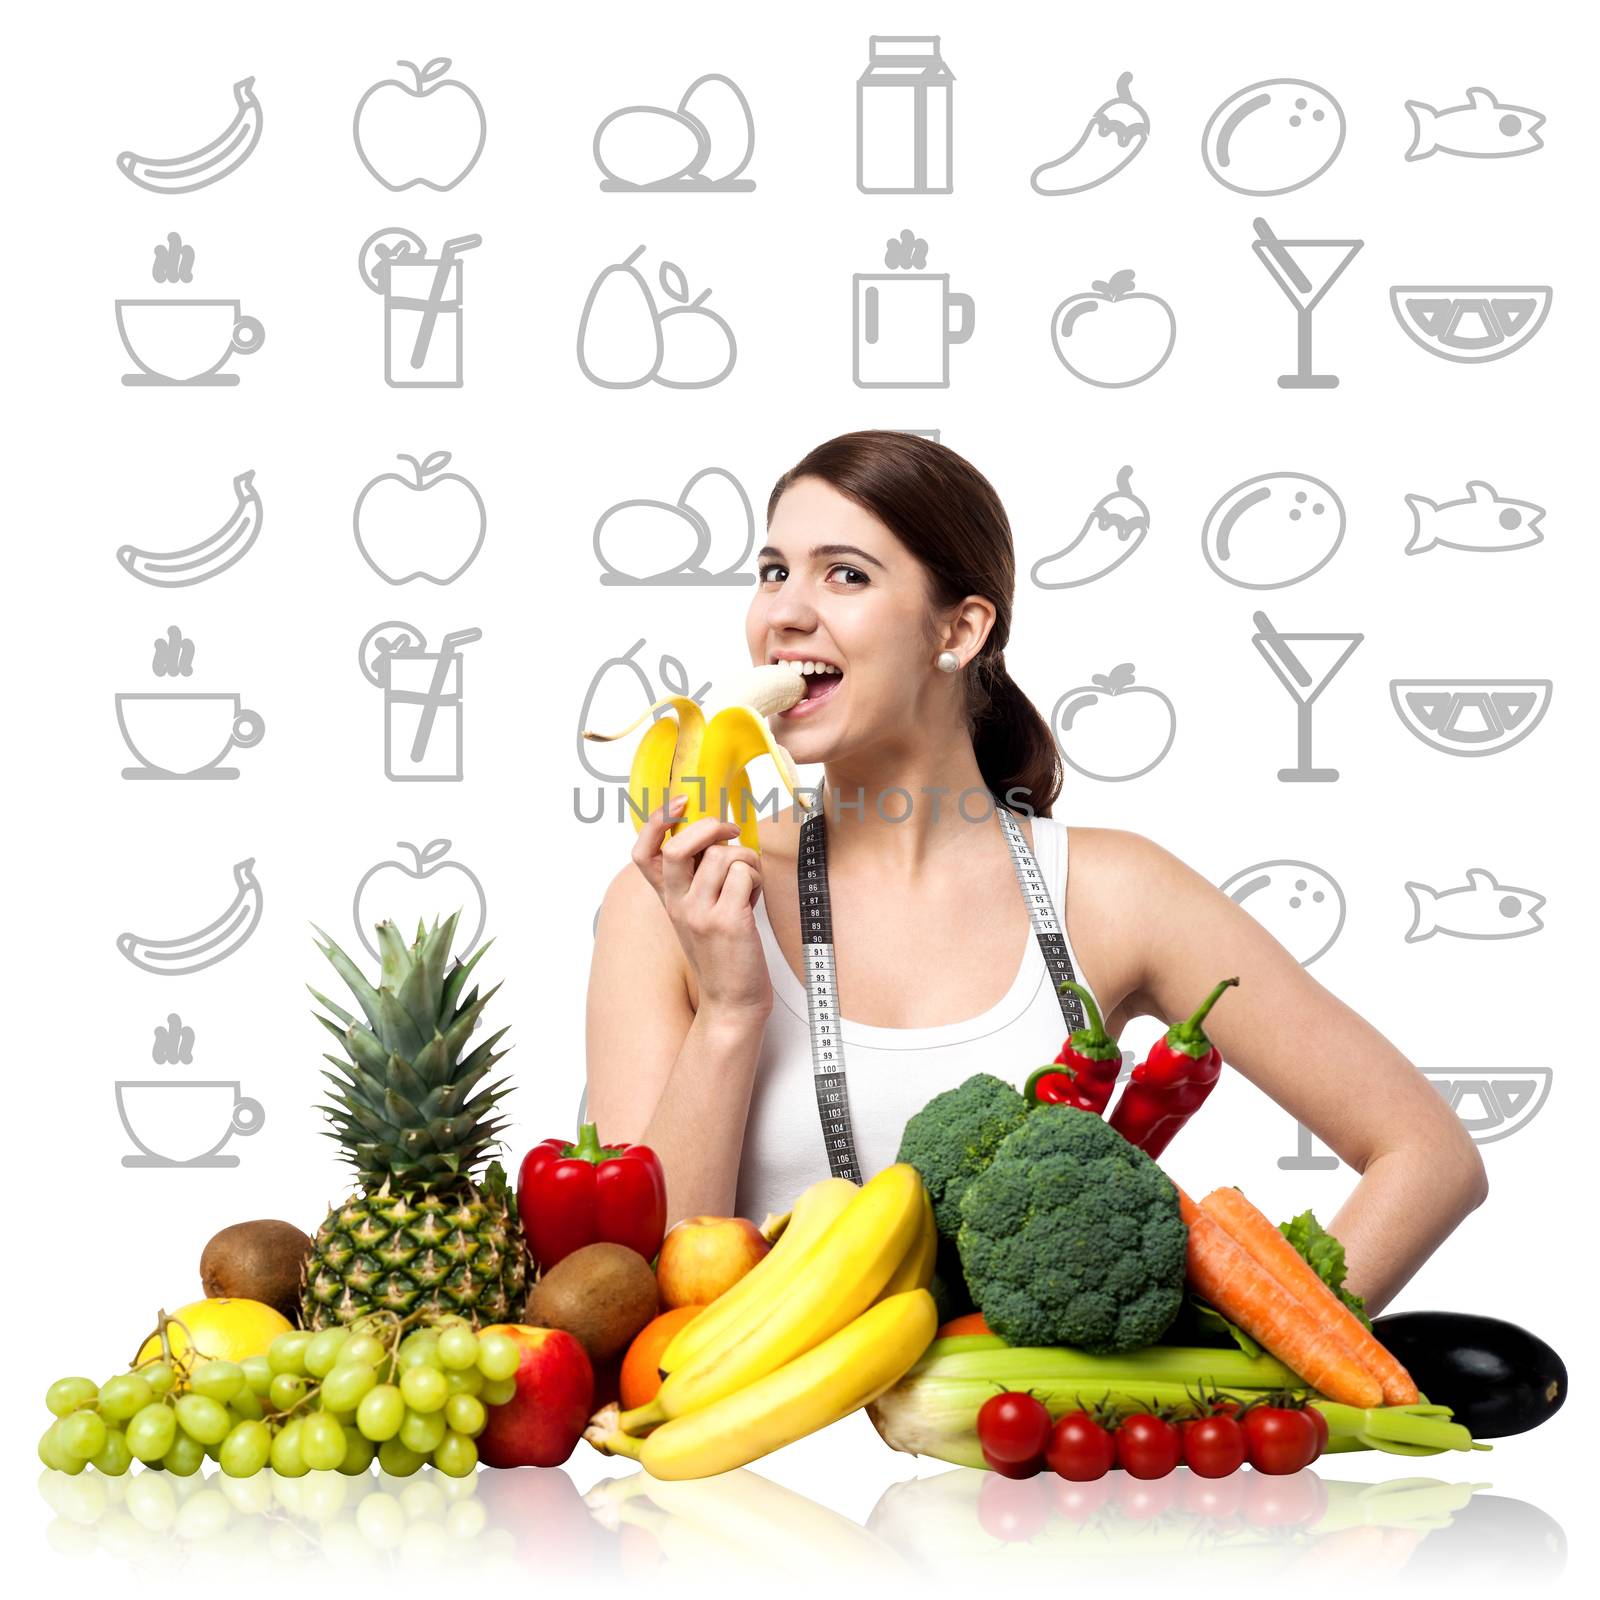 Young woman eating banana, stay fit